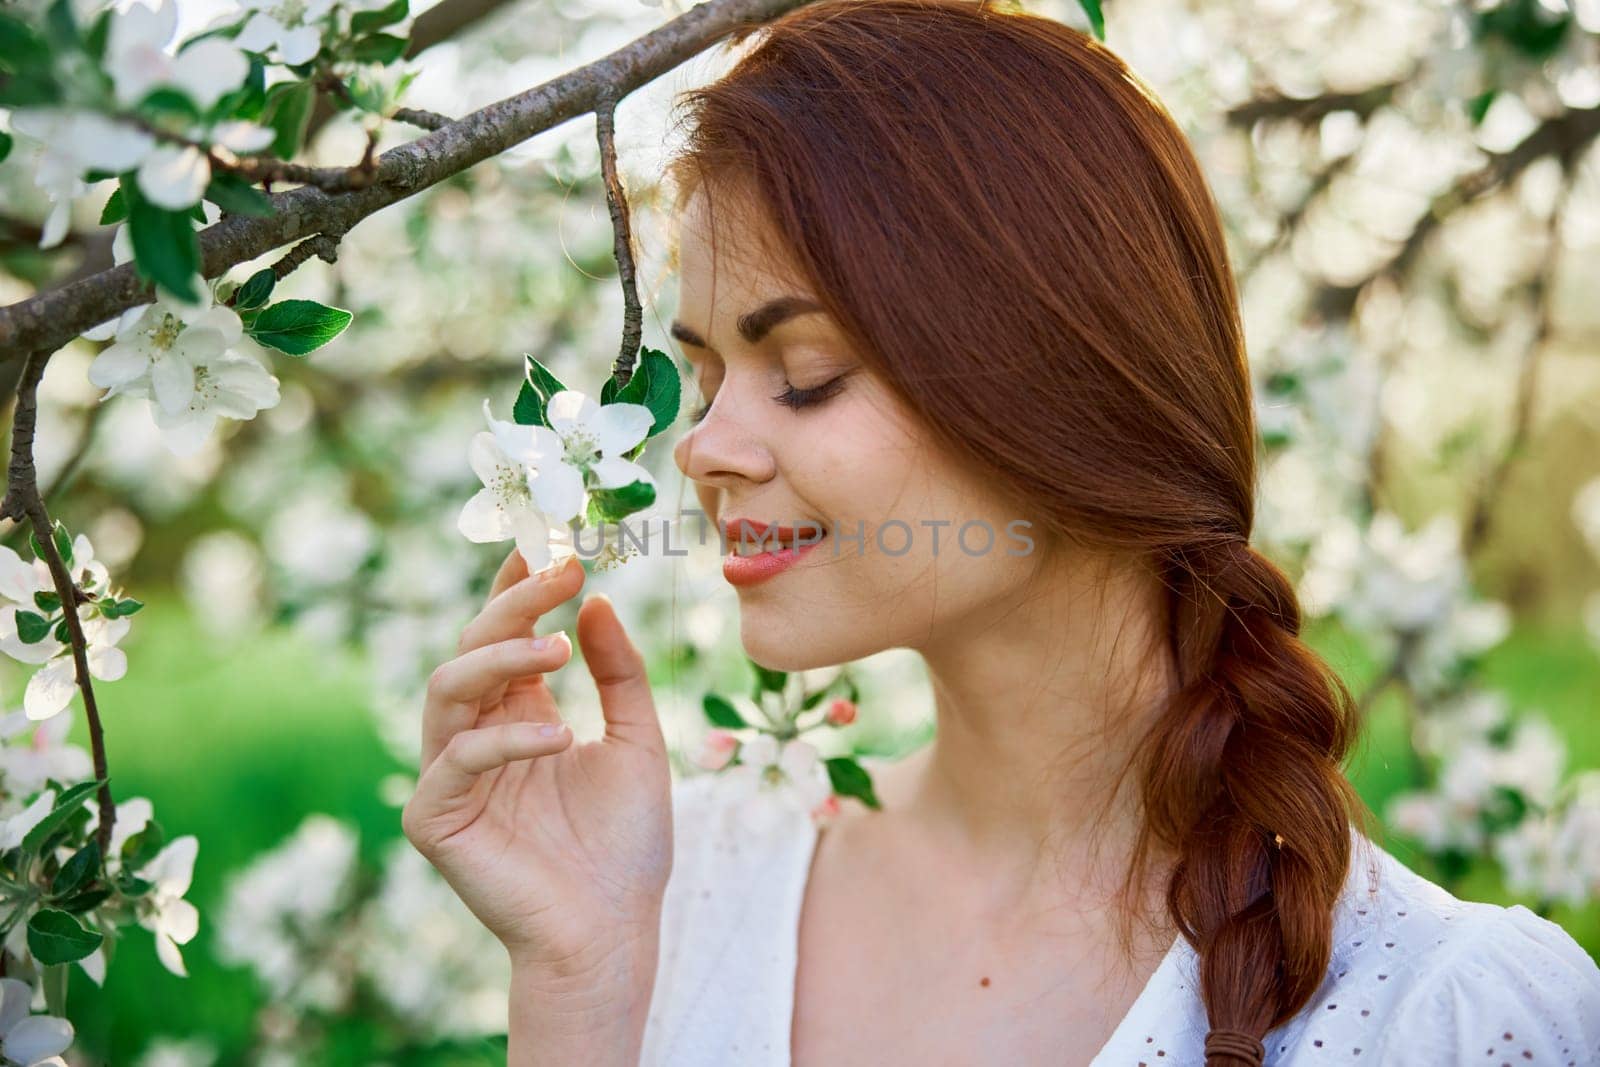 close portrait of a red-haired, laughing woman smelling flowers from a tree. High quality photo